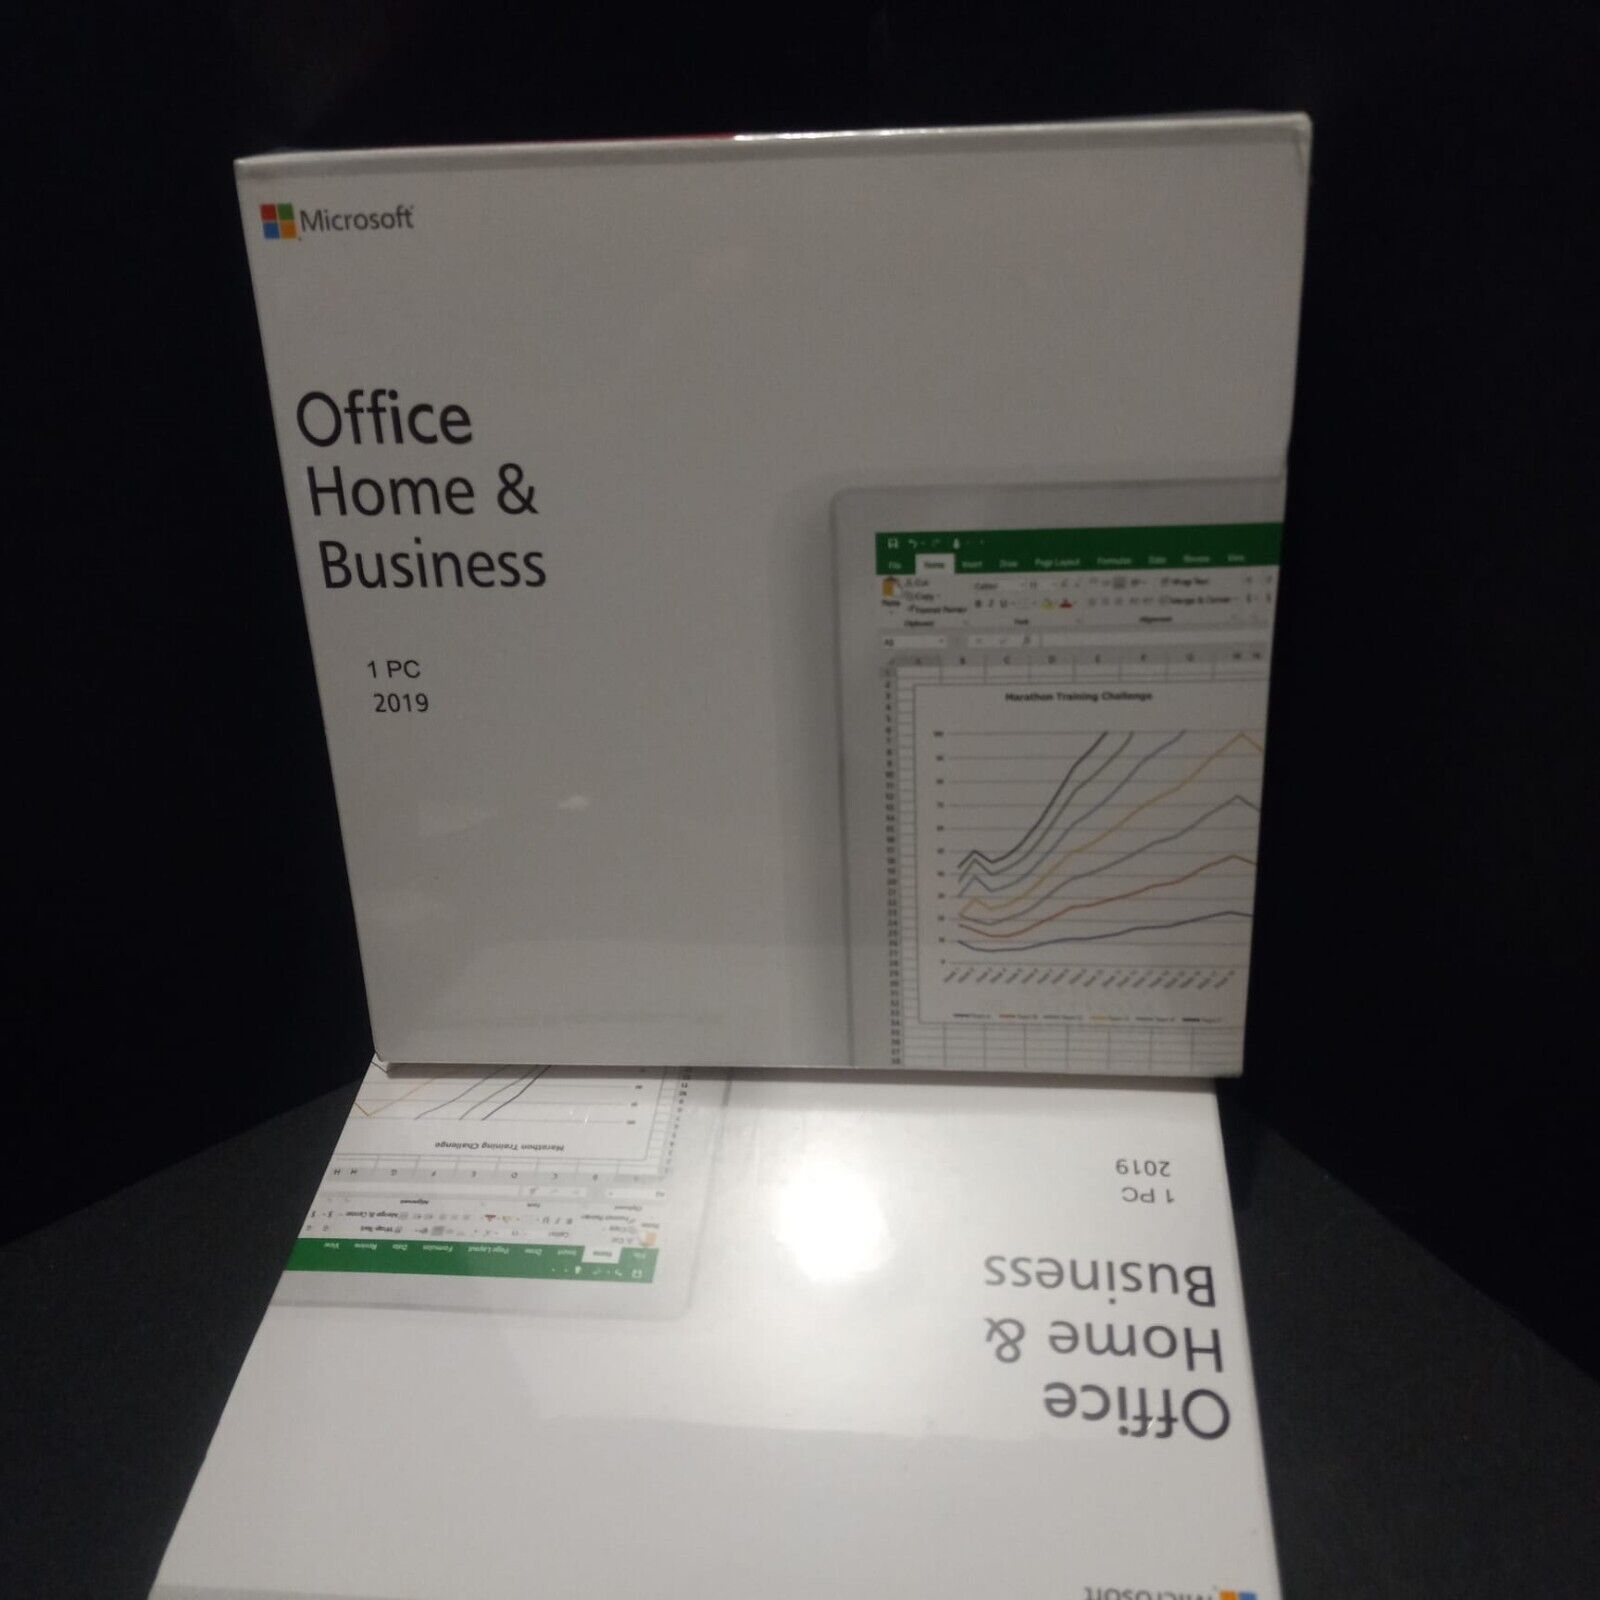 Microsoft Office Home & Business 2019 for Windows only 1PC Retail DVD lifetime